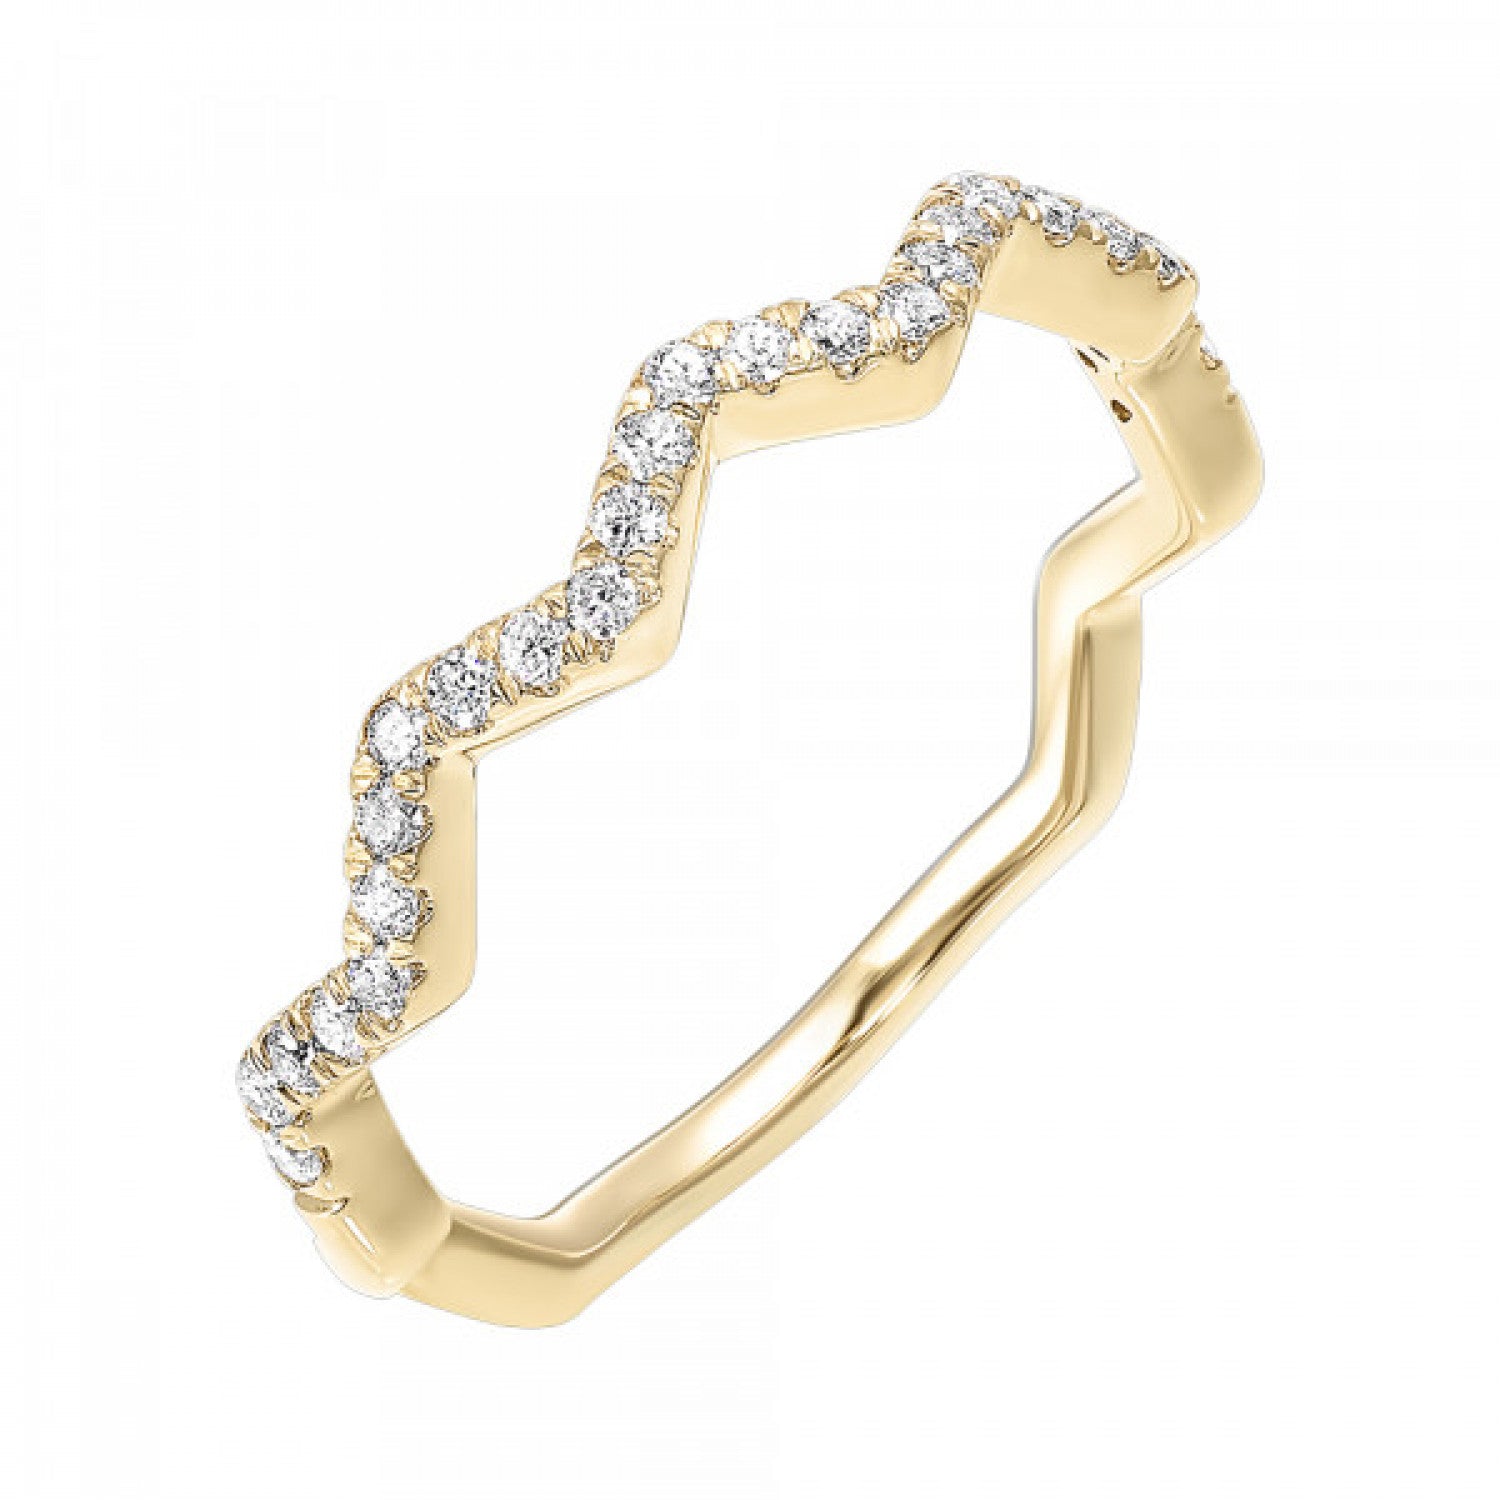 10KT Diamond (1/5CTW) Band- Available in Rose, Yellow and White Gold